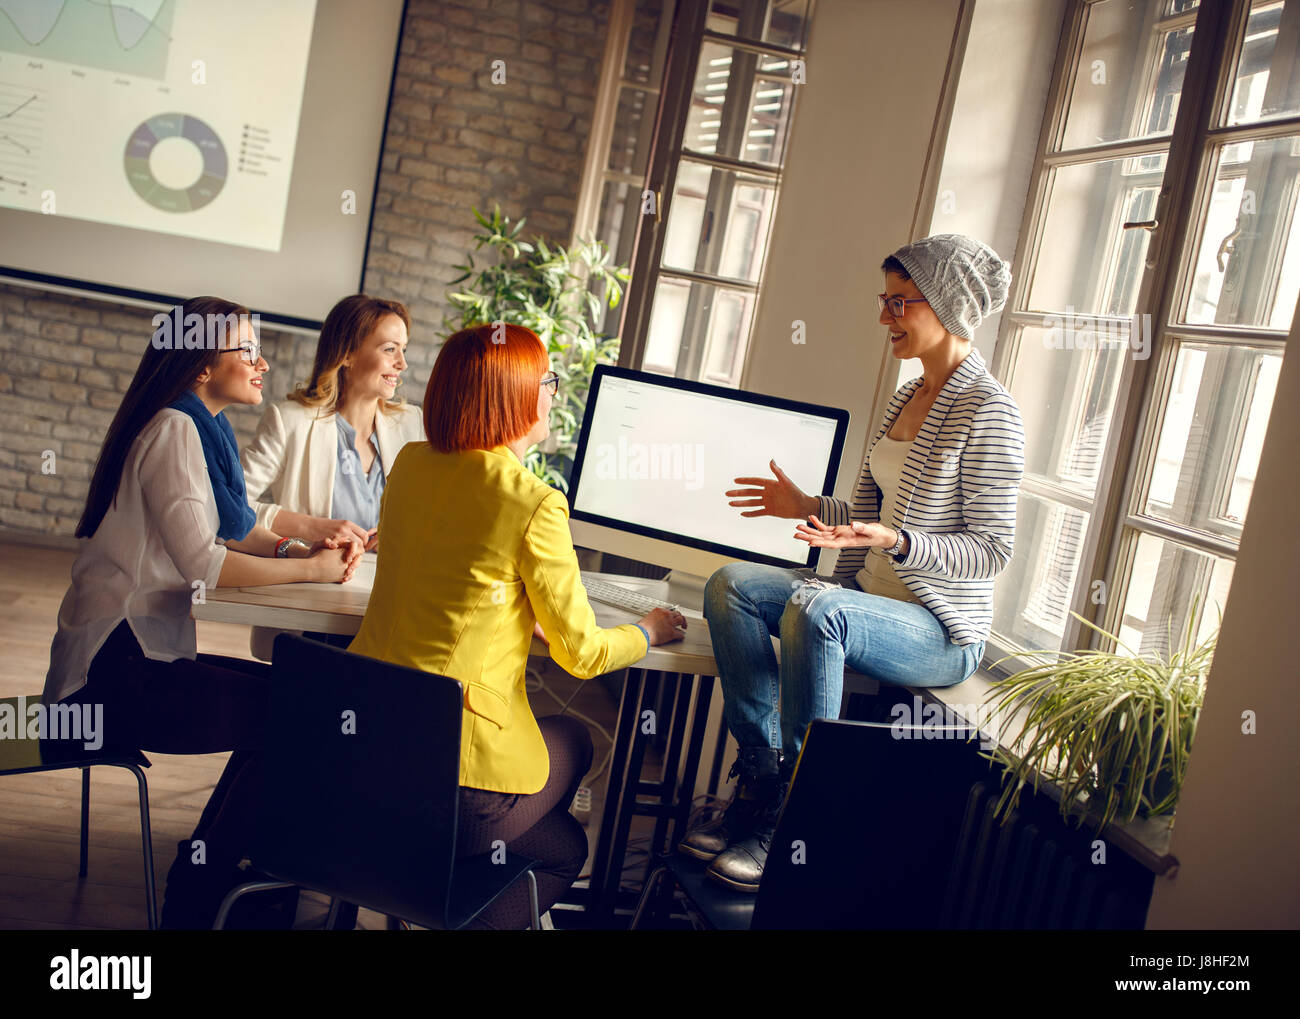 Women at workplace presents ideas one to another for new business Stock Photo